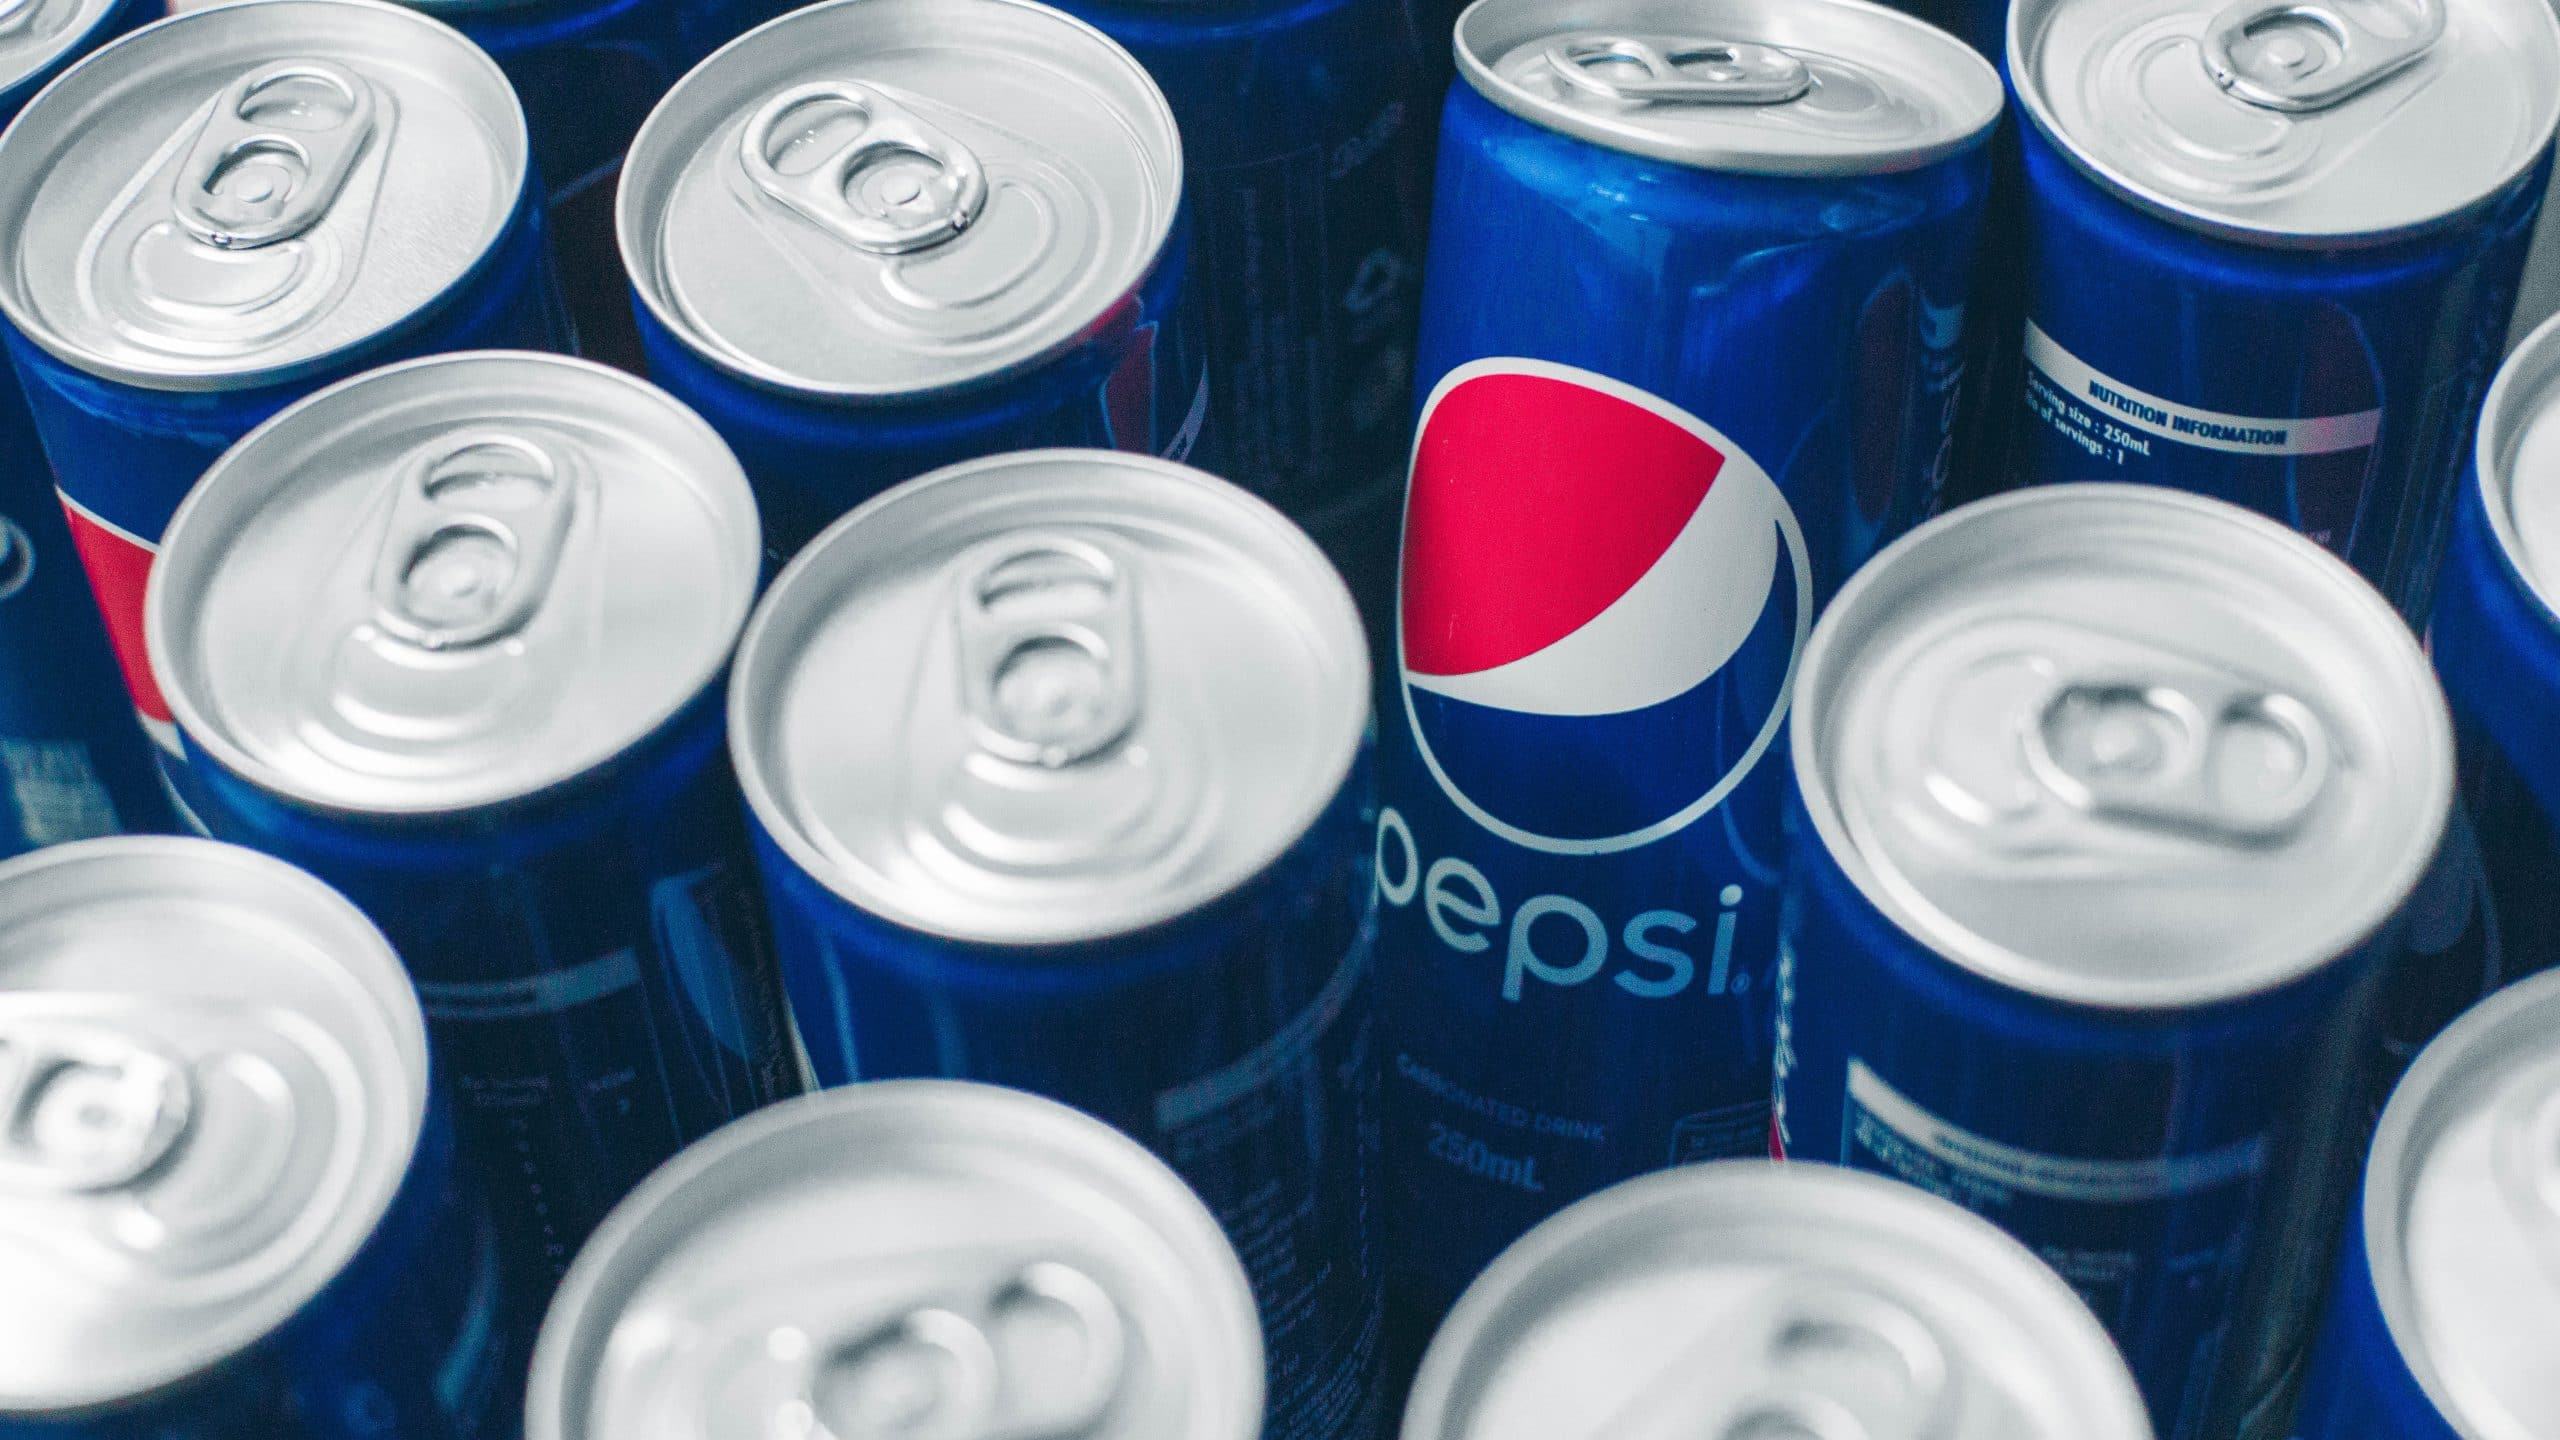 Why was Pepsi Max brand a sustainable step for PepsiCo?